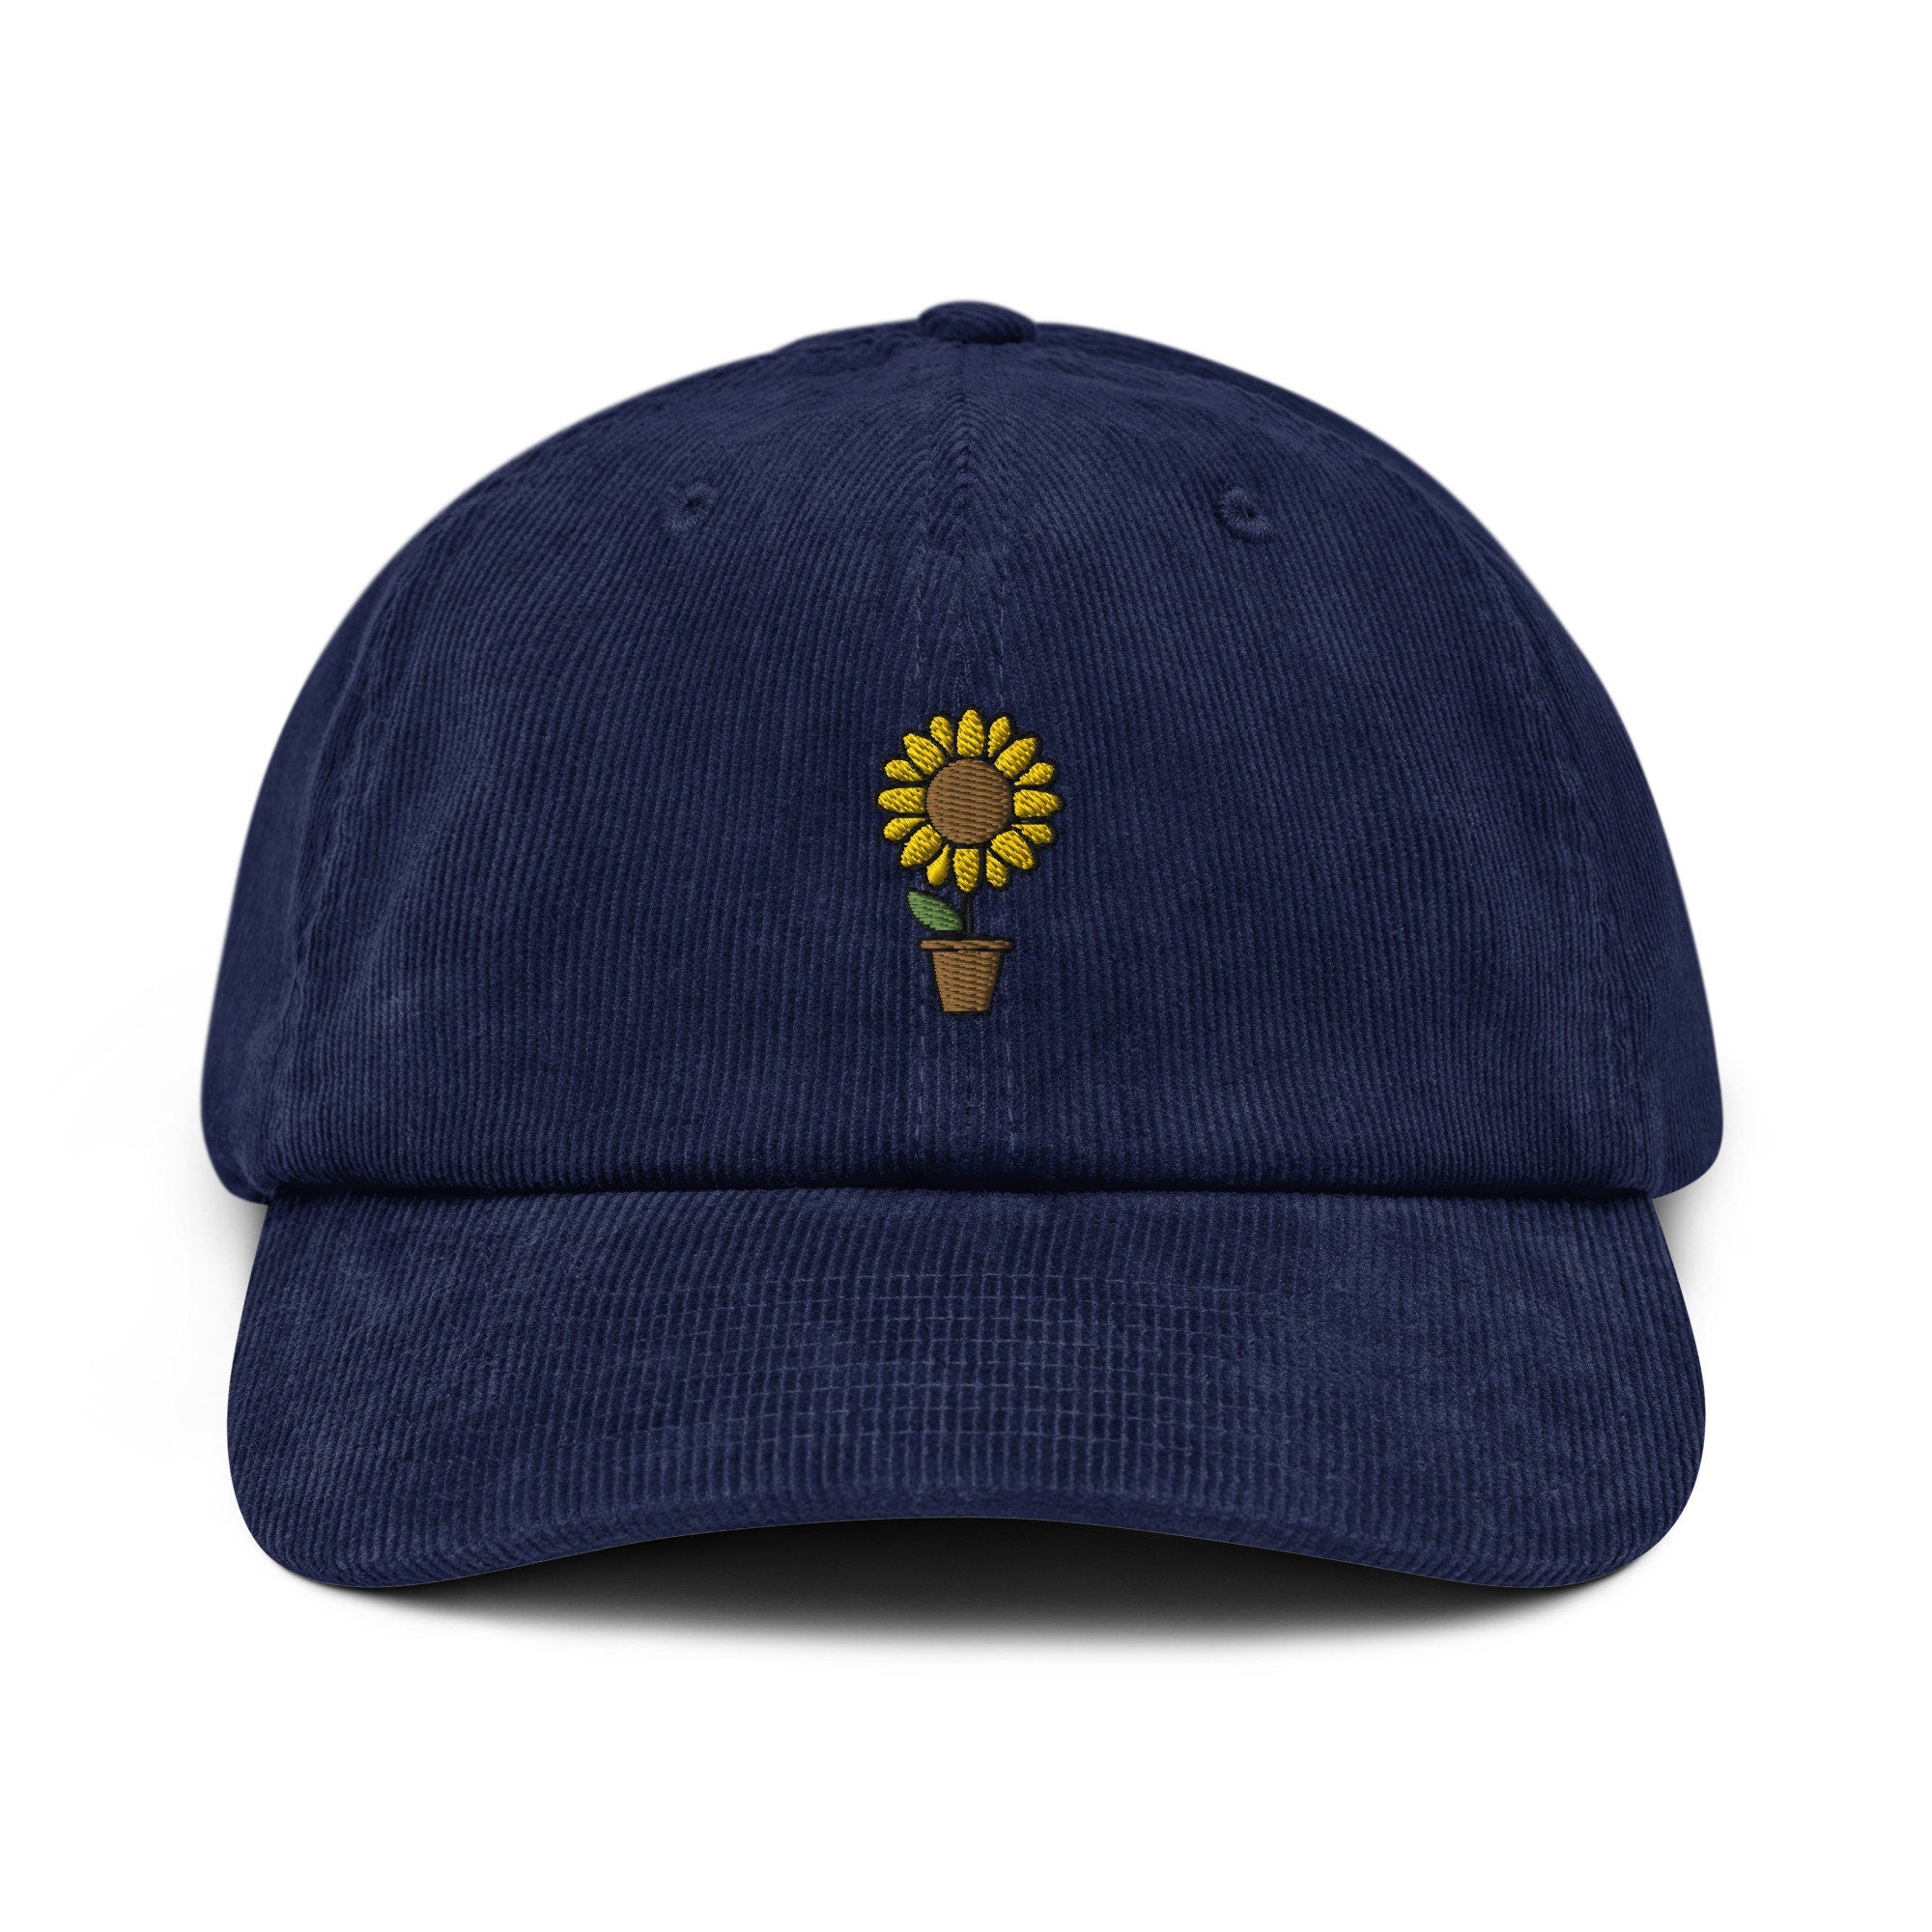 Sunflower Embroidered Corduroy Dad Hat, Handmade Corduroy Baseball Cap Gift - Multiple Colors